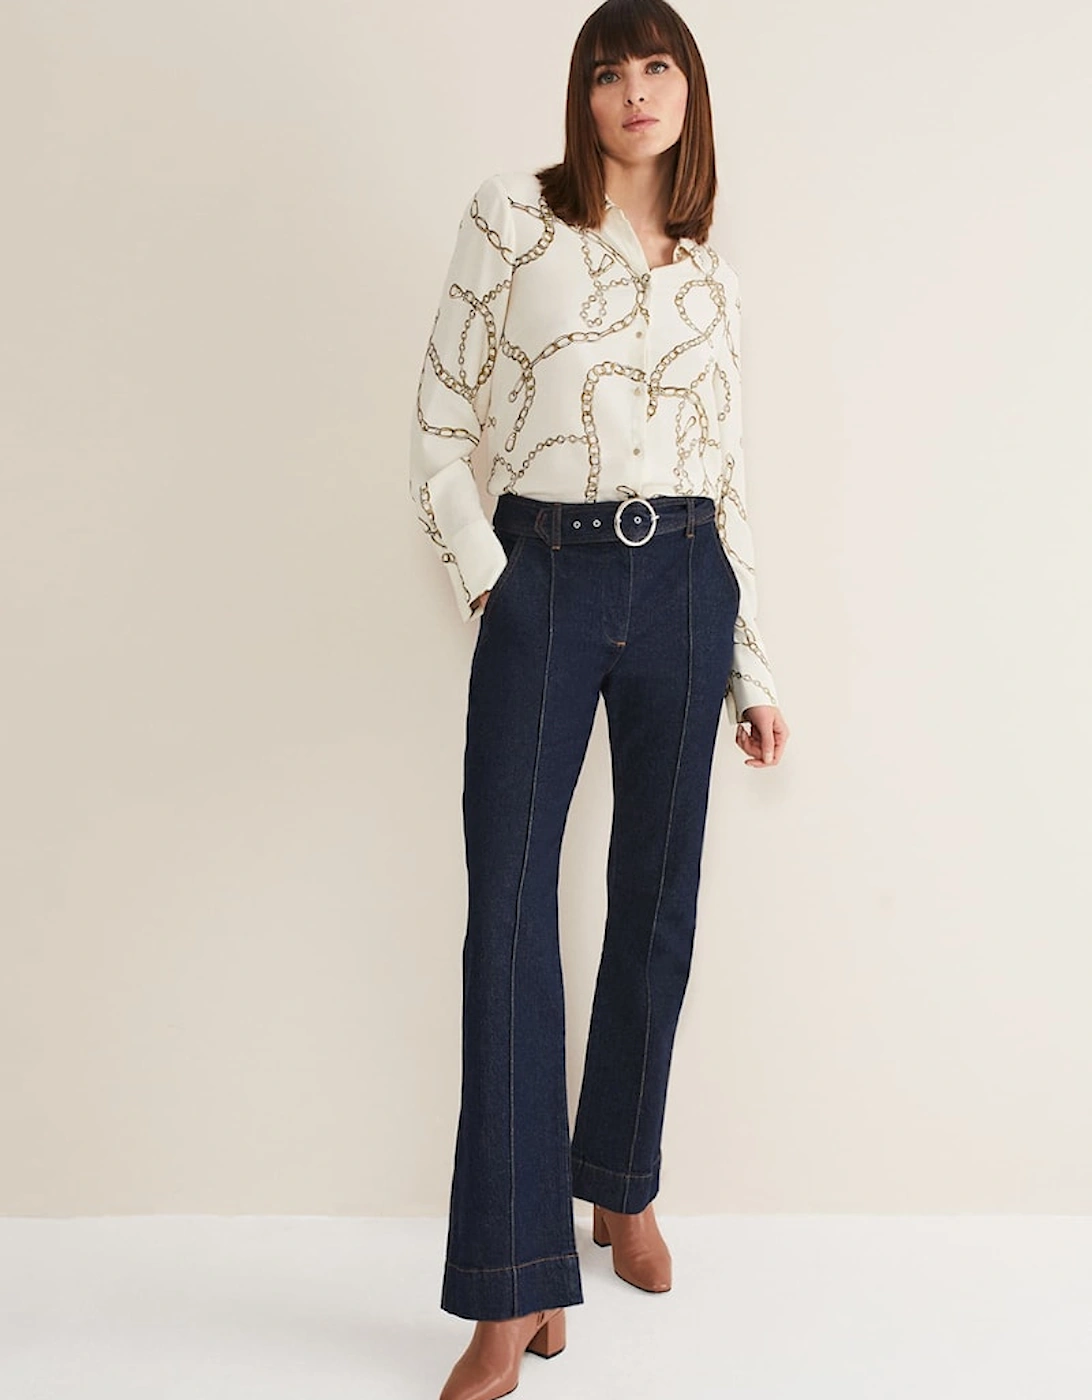 Shawna Belted Bootcut Jeans